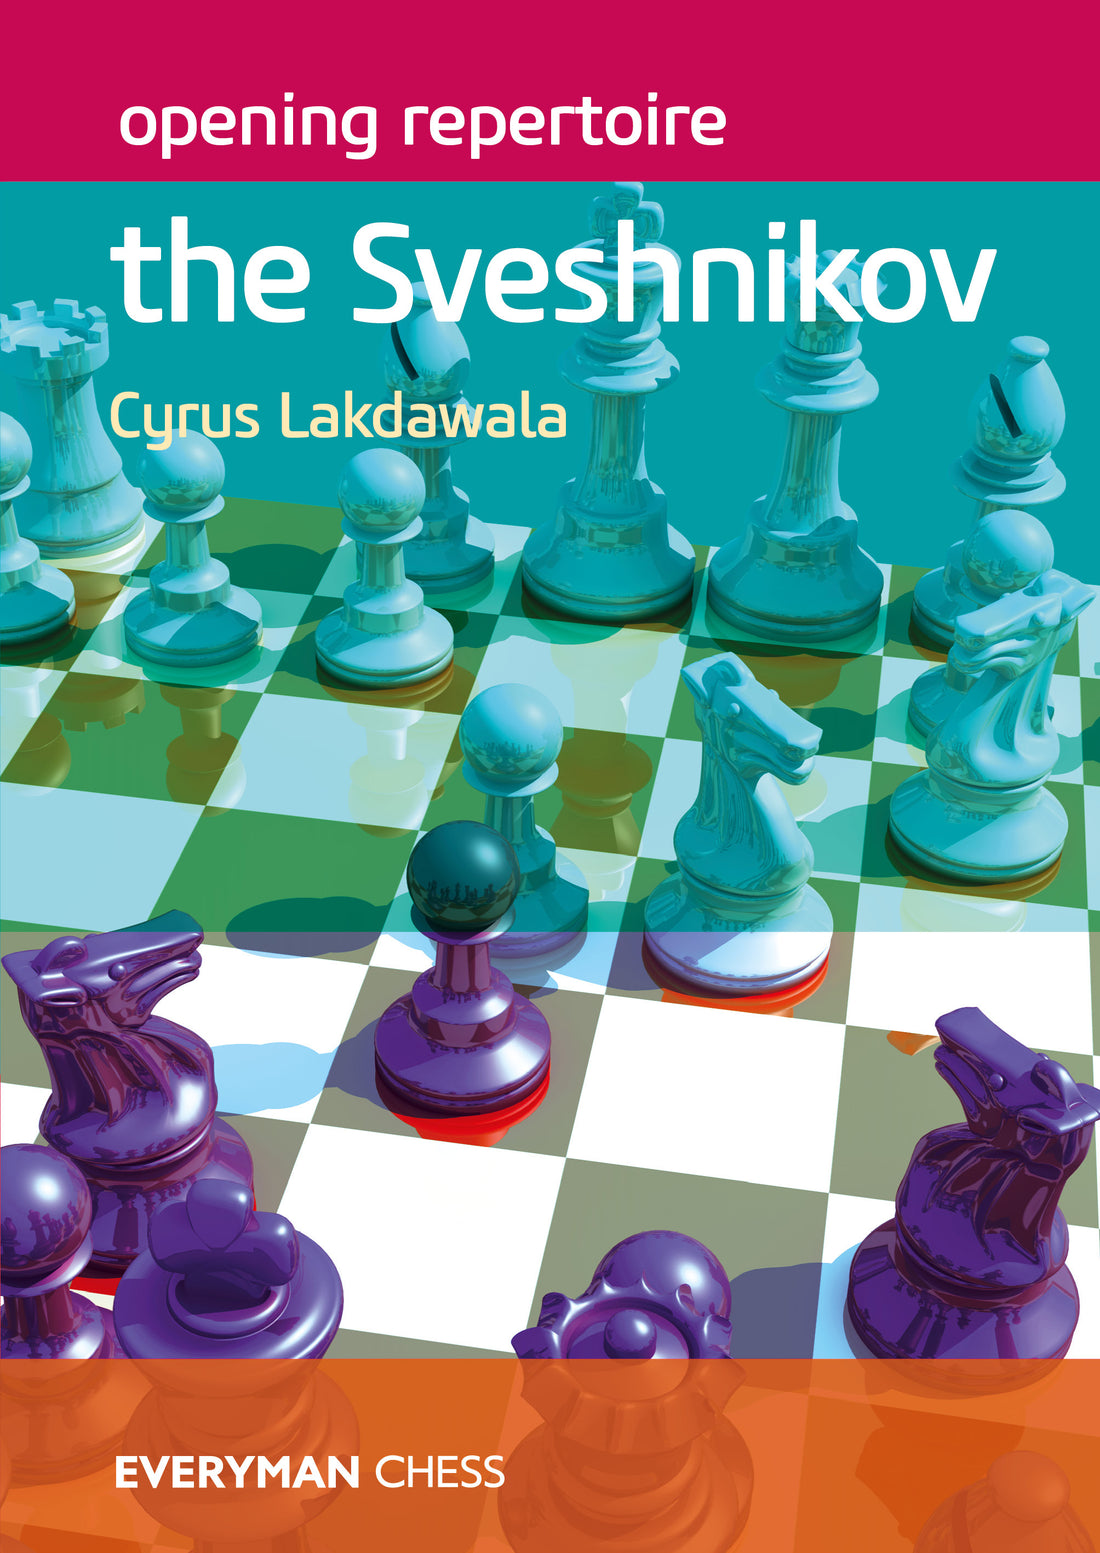 Collection of chess openings #AllThingsChess